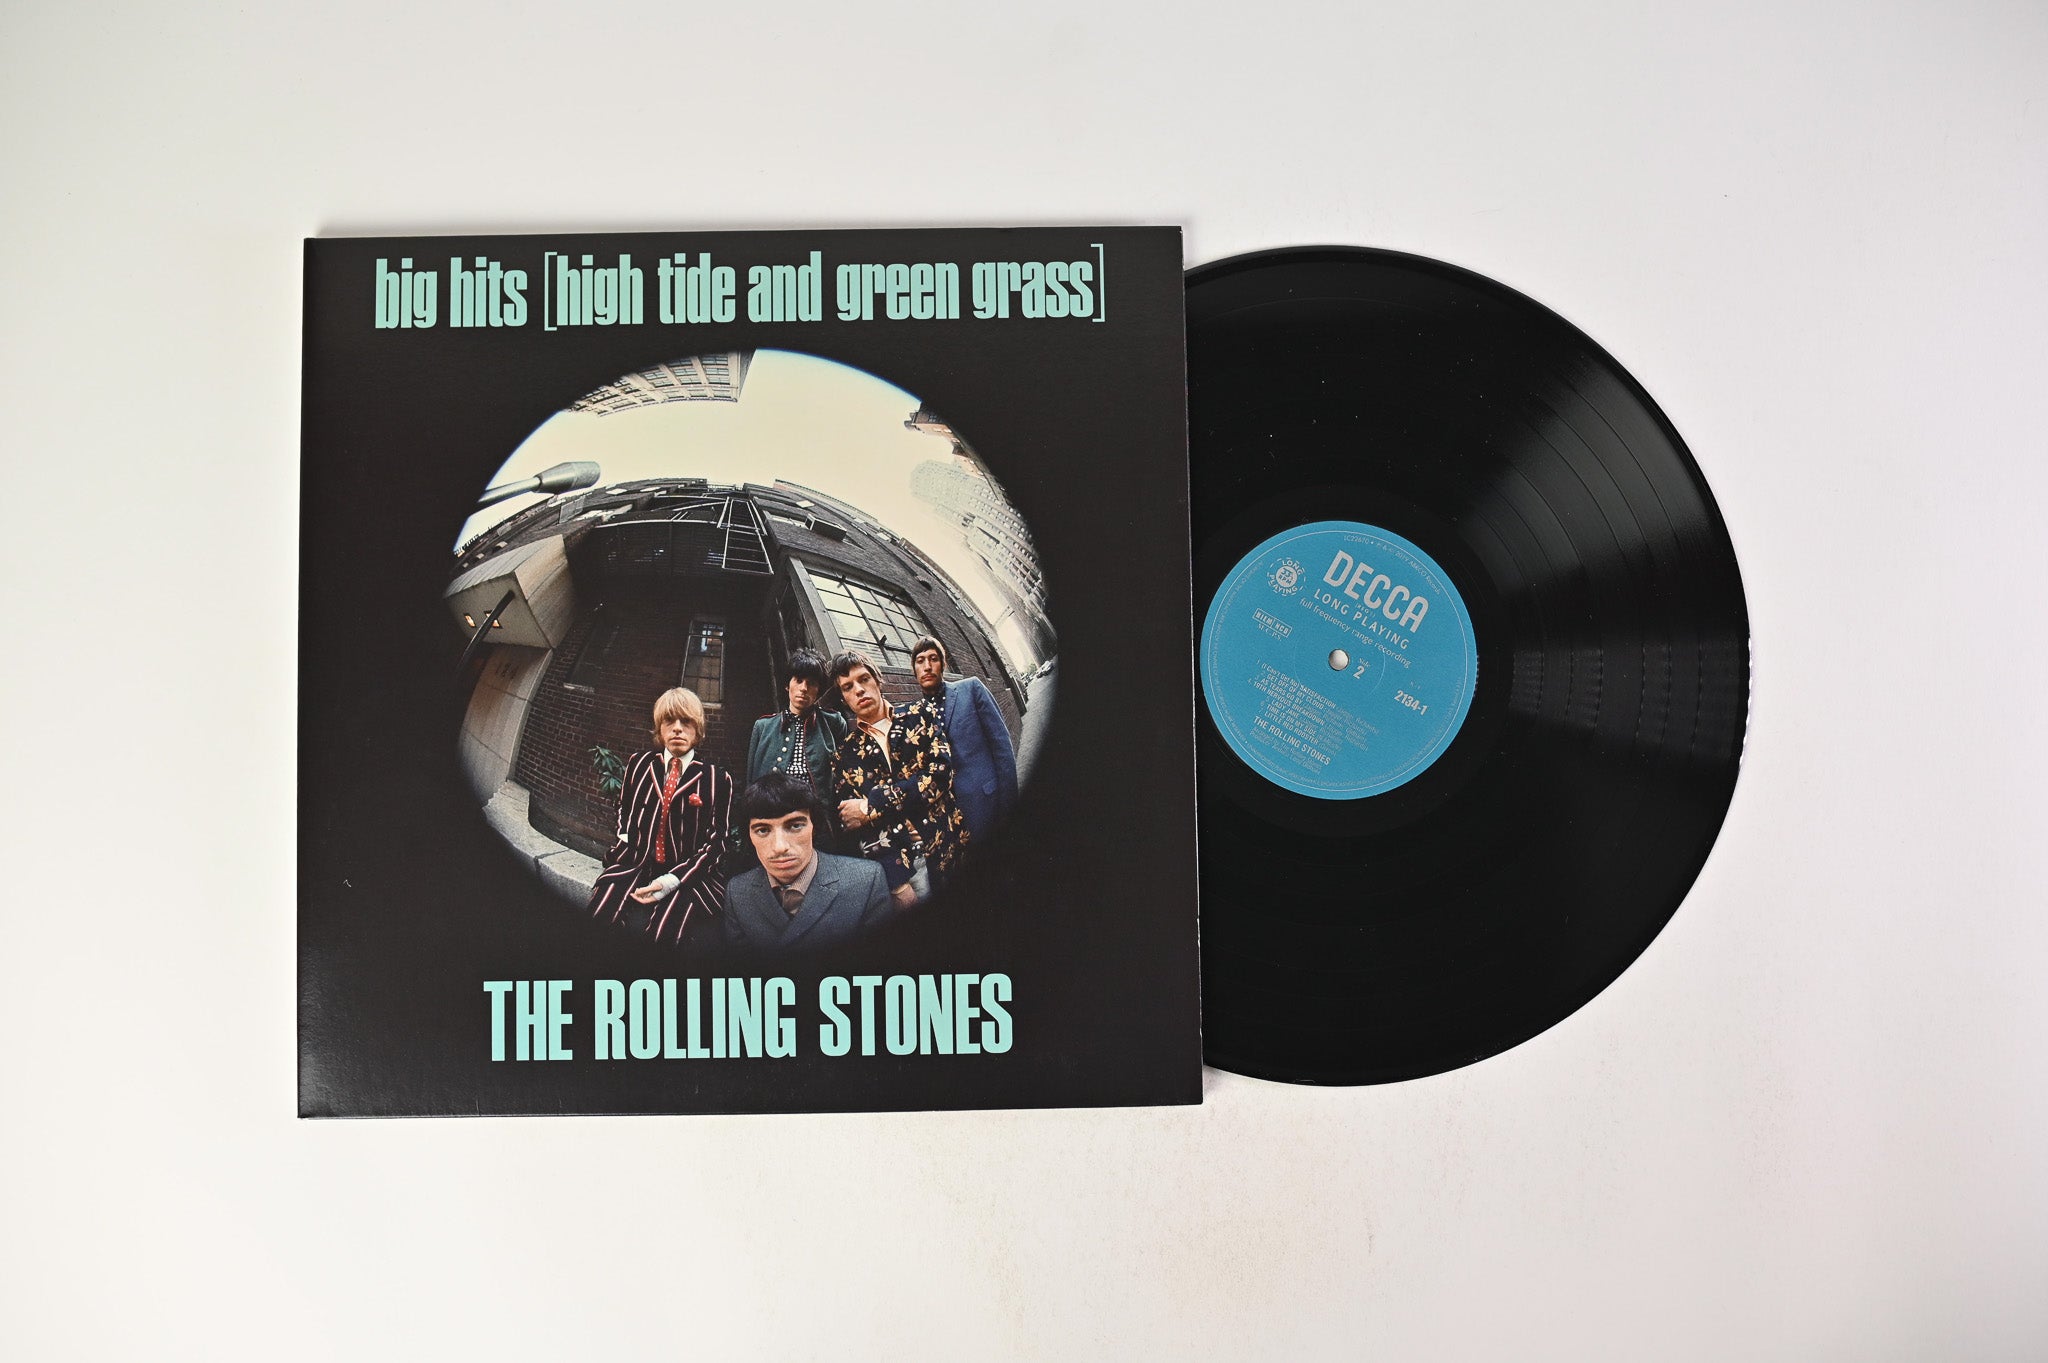 The Rolling Stones - Big Hits (High Tide And Green Grass) Reissue on ABKCO/Decca